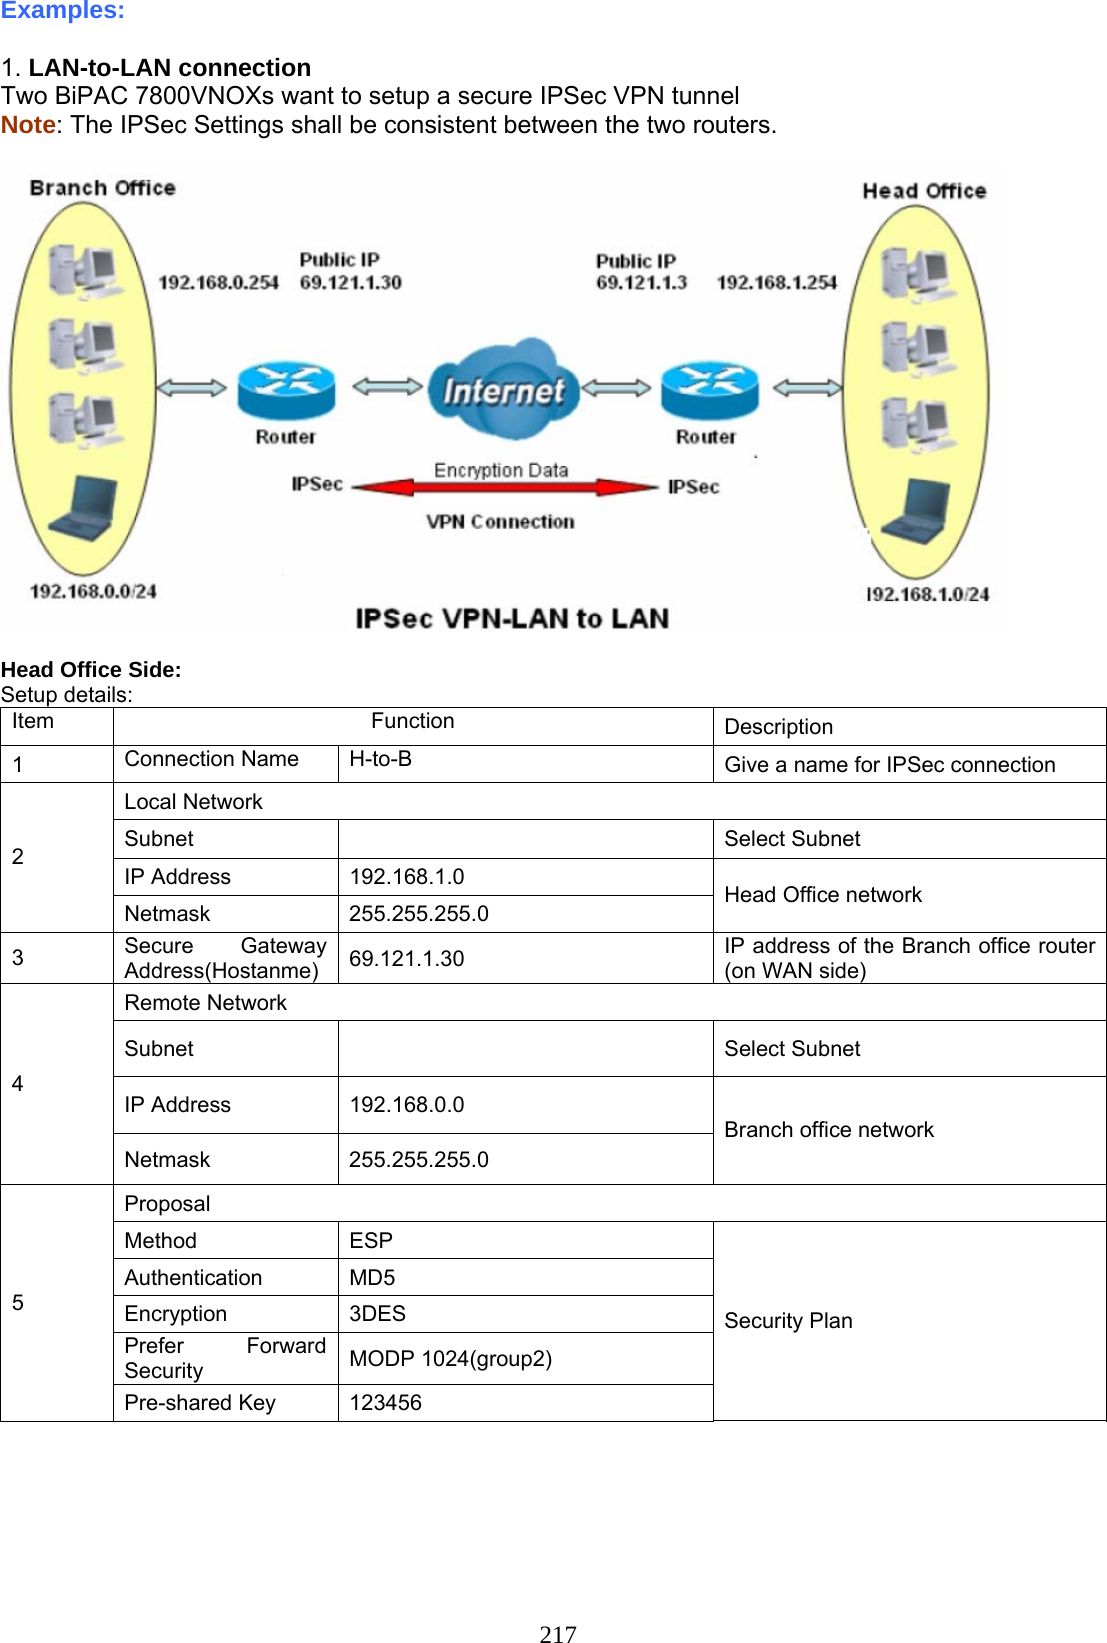 217 Examples:   1. LAN-to-LAN connection Two BiPAC 7800VNOXs want to setup a secure IPSec VPN tunnel  Note: The IPSec Settings shall be consistent between the two routers.    Head Office Side: Setup details: Item Function Description 1  Connection Name  H-to-B  Give a name for IPSec connection Local Network Subnet   Select Subnet  IP Address  192.168.1.0 2 Netmask 255.255.255.0  Head Office network 3  Secure Gateway Address(Hostanme)  69.121.1.30  IP address of the Branch office router (on WAN side) Remote Network Subnet   Select Subnet IP Address  192.168.0.0 4 Netmask 255.255.255.0 Branch office network Proposal Method   ESP Authentication MD5 Encryption   3DES Prefer Forward Security   MODP 1024(group2) 5 Pre-shared Key  123456 Security Plan 